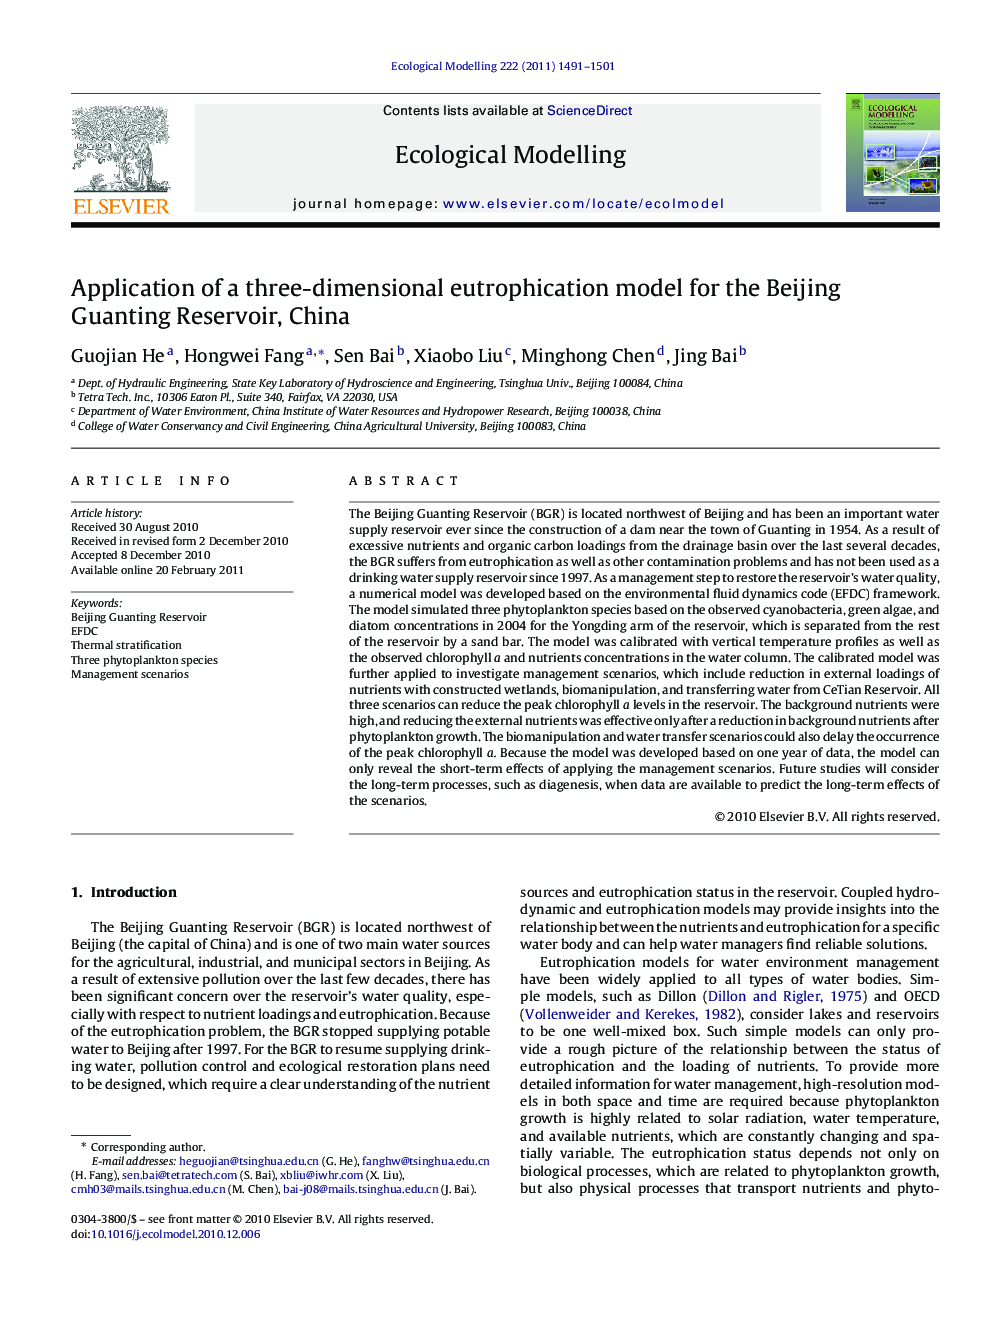 Application of a three-dimensional eutrophication model for the Beijing Guanting Reservoir, China